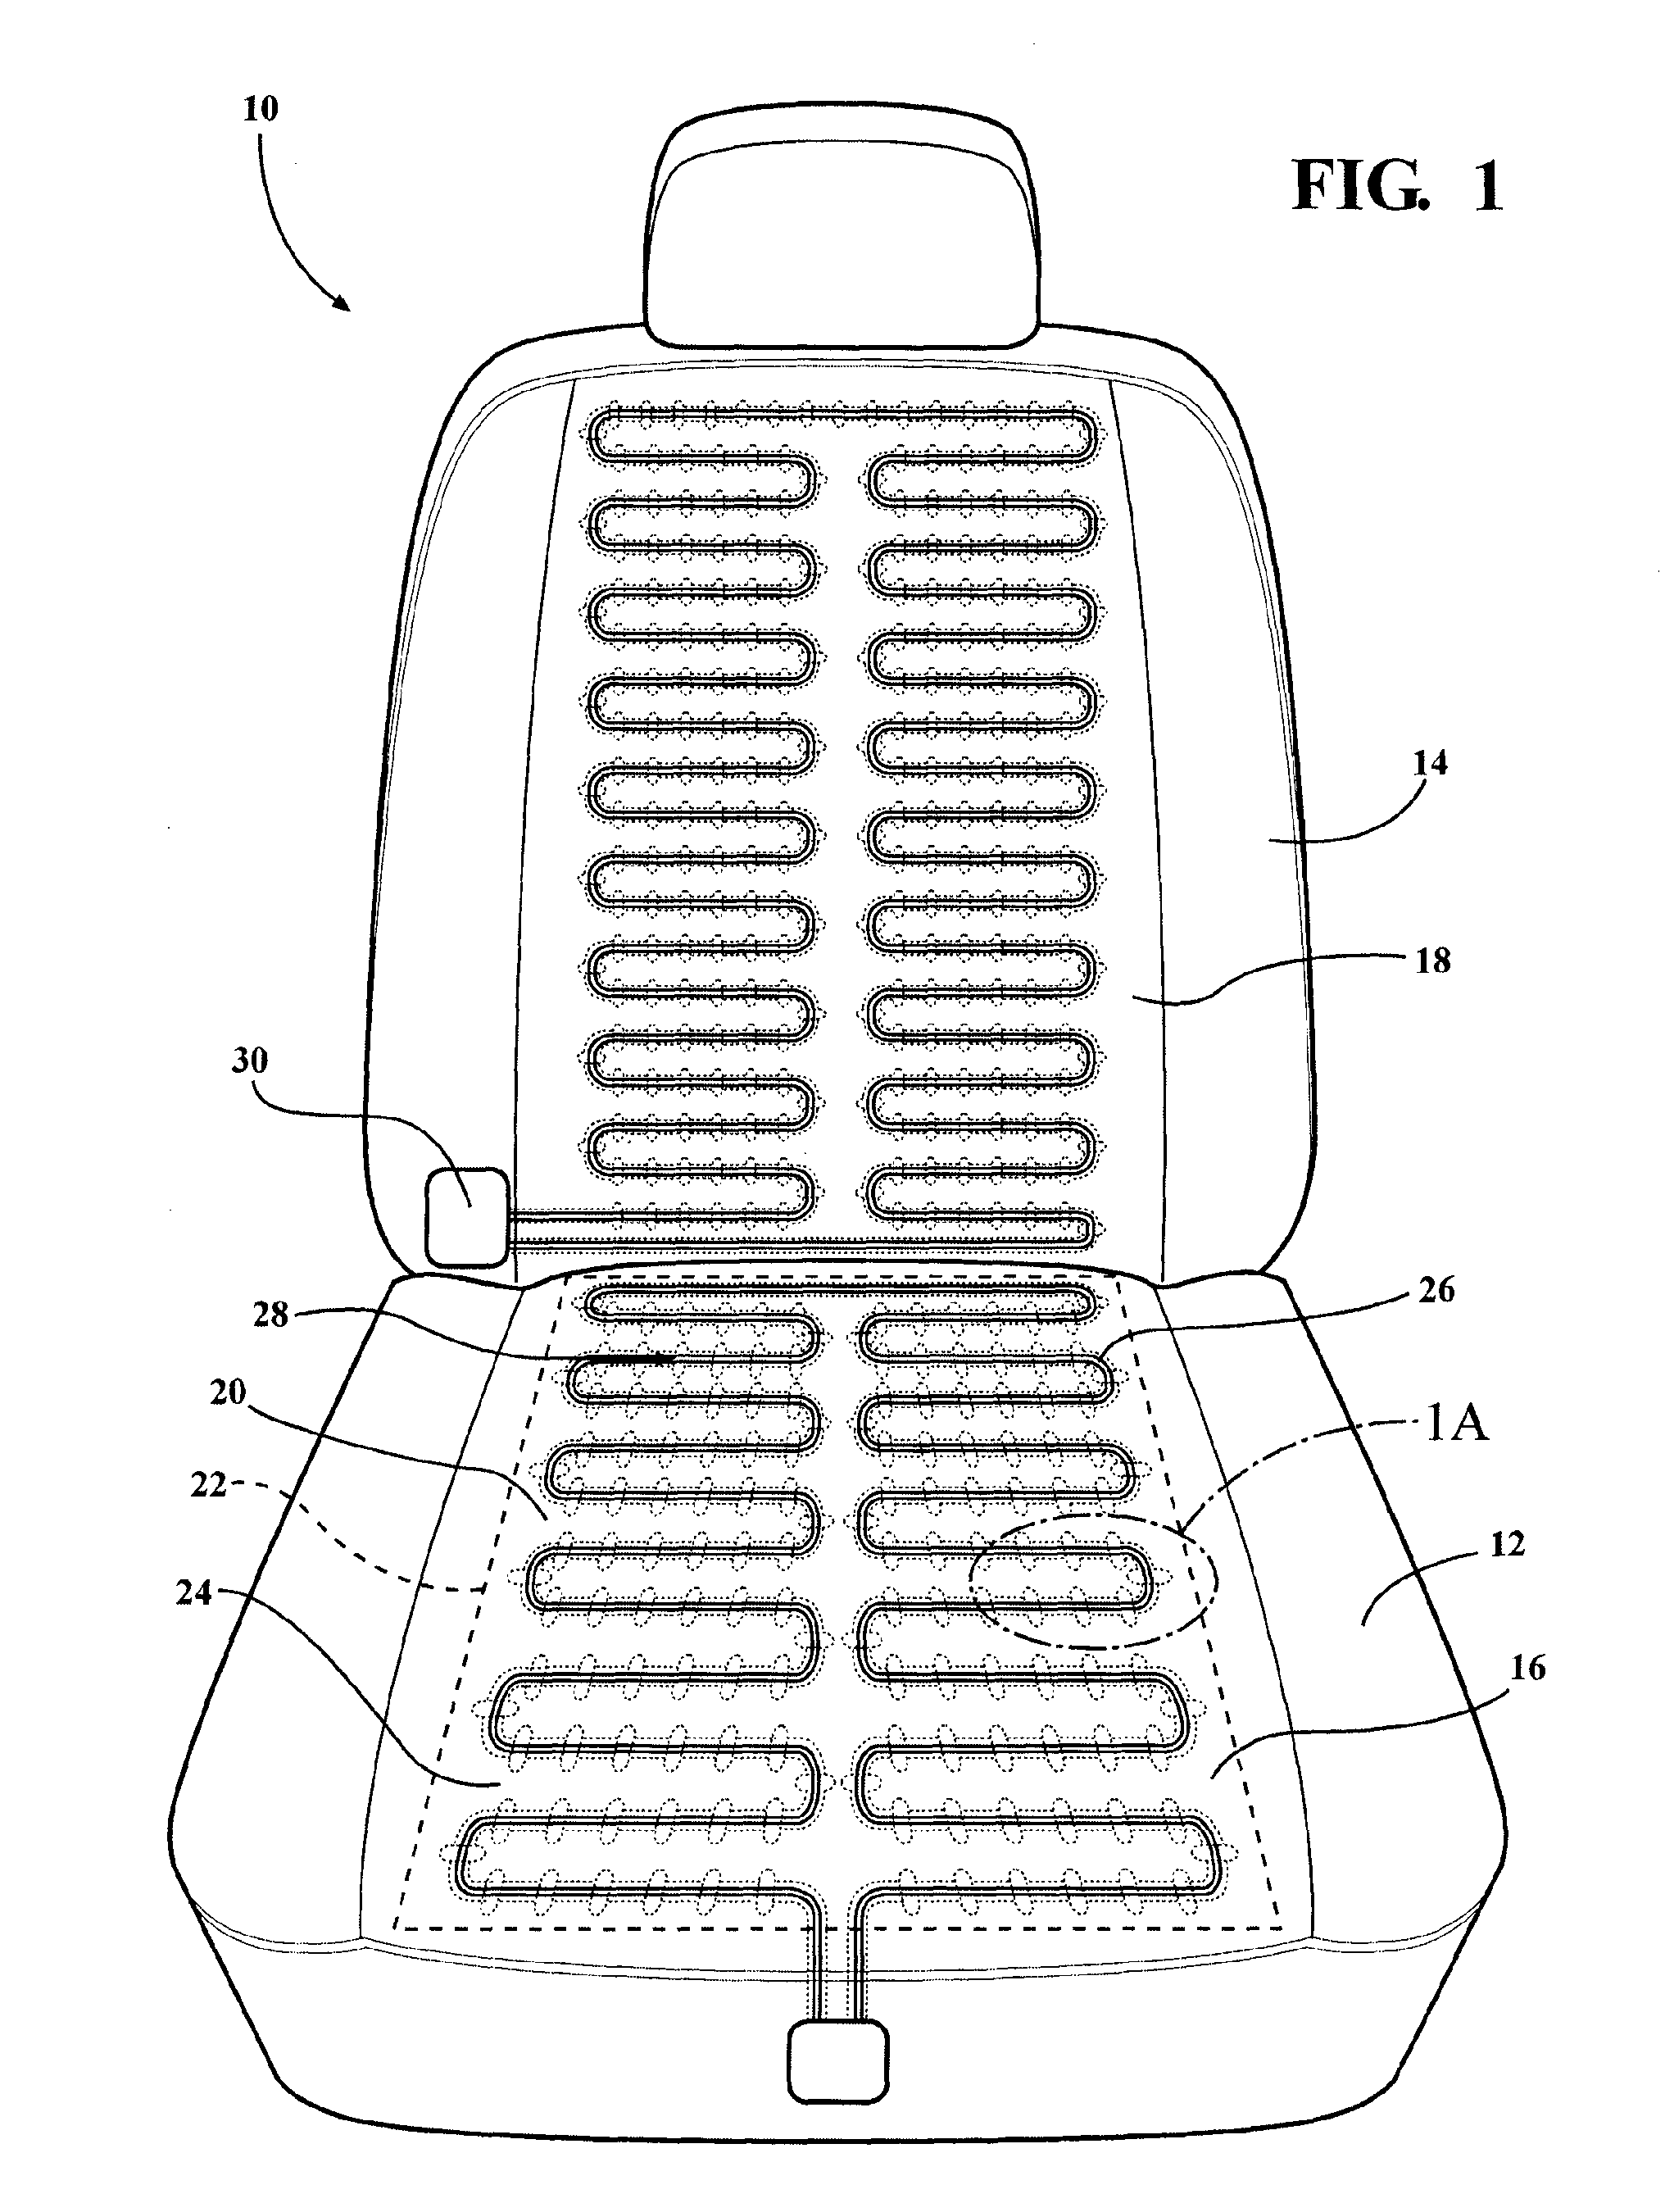 Seat assembly having heating element providing electrical heating of variable temperature along a predetermined path to a zone